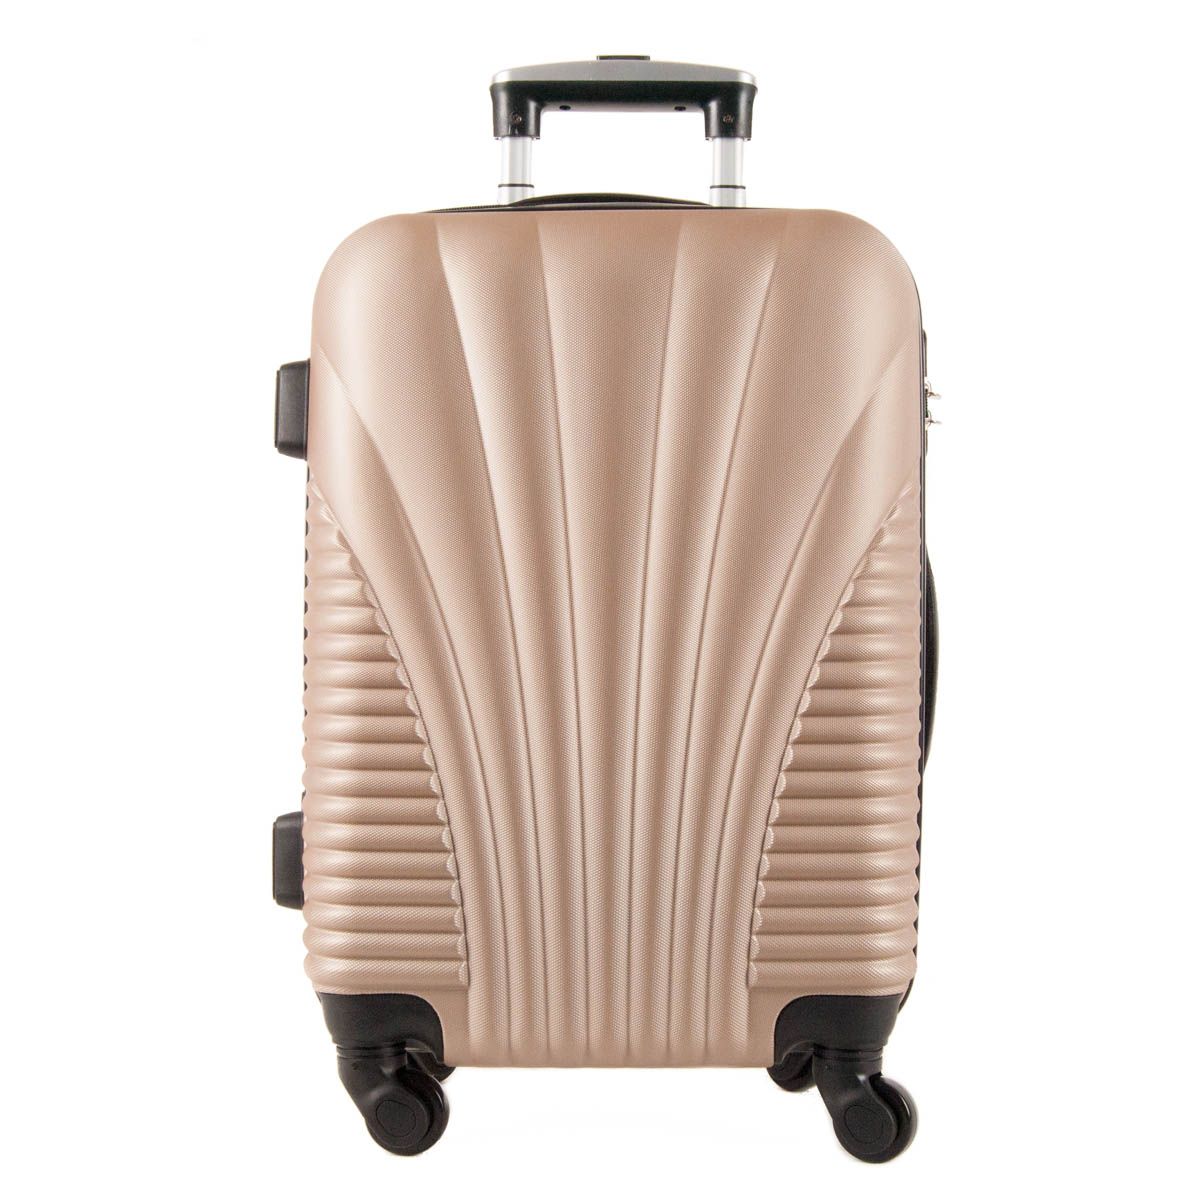 High quality ABS suitcase and resistance. Approximate measures: 47 * 34 * 20 (cabin suitcase), has capacity for 40 liters, is suitable for carrying in Ryanair, for an example. This suitcase is made of acrylonitrile-styrene-butadiene, a high-impact polymer that is used in difficult cases due to greater resistance. It is a light resin material that is less spider. It is, therefore, a very resistant plastic that can be manufactured in different finishes, colors and shapes. These ABS suitcases use zipper lock by combination, through a numeric combination that only your will, which provides great security to your luggage. The zipper is surrounded by a rubber coating, as a protection. We commented on some of its benefits: they are hard, they are resistant to blows, they are resistant to abrasion, they are light and granted less than other types of suitcases. These suitcases have an exclusive and original design, consist of a Spinner Trolley system to make it more comfortable and easy to transport, with its 4 revolving and silent double wheels. In addition, it has a trailer system with ergonomic handle and push button, and a higher handle in 2 positions. Inside consists of two departments, closure by zipper. Outside, on one side, it has 4 support points to place the suitcase horizontally, easily. Outside, on one side, it has 4 support points to place the suitcase horizontally, easily, besides two flexible handles at the top and lateral.